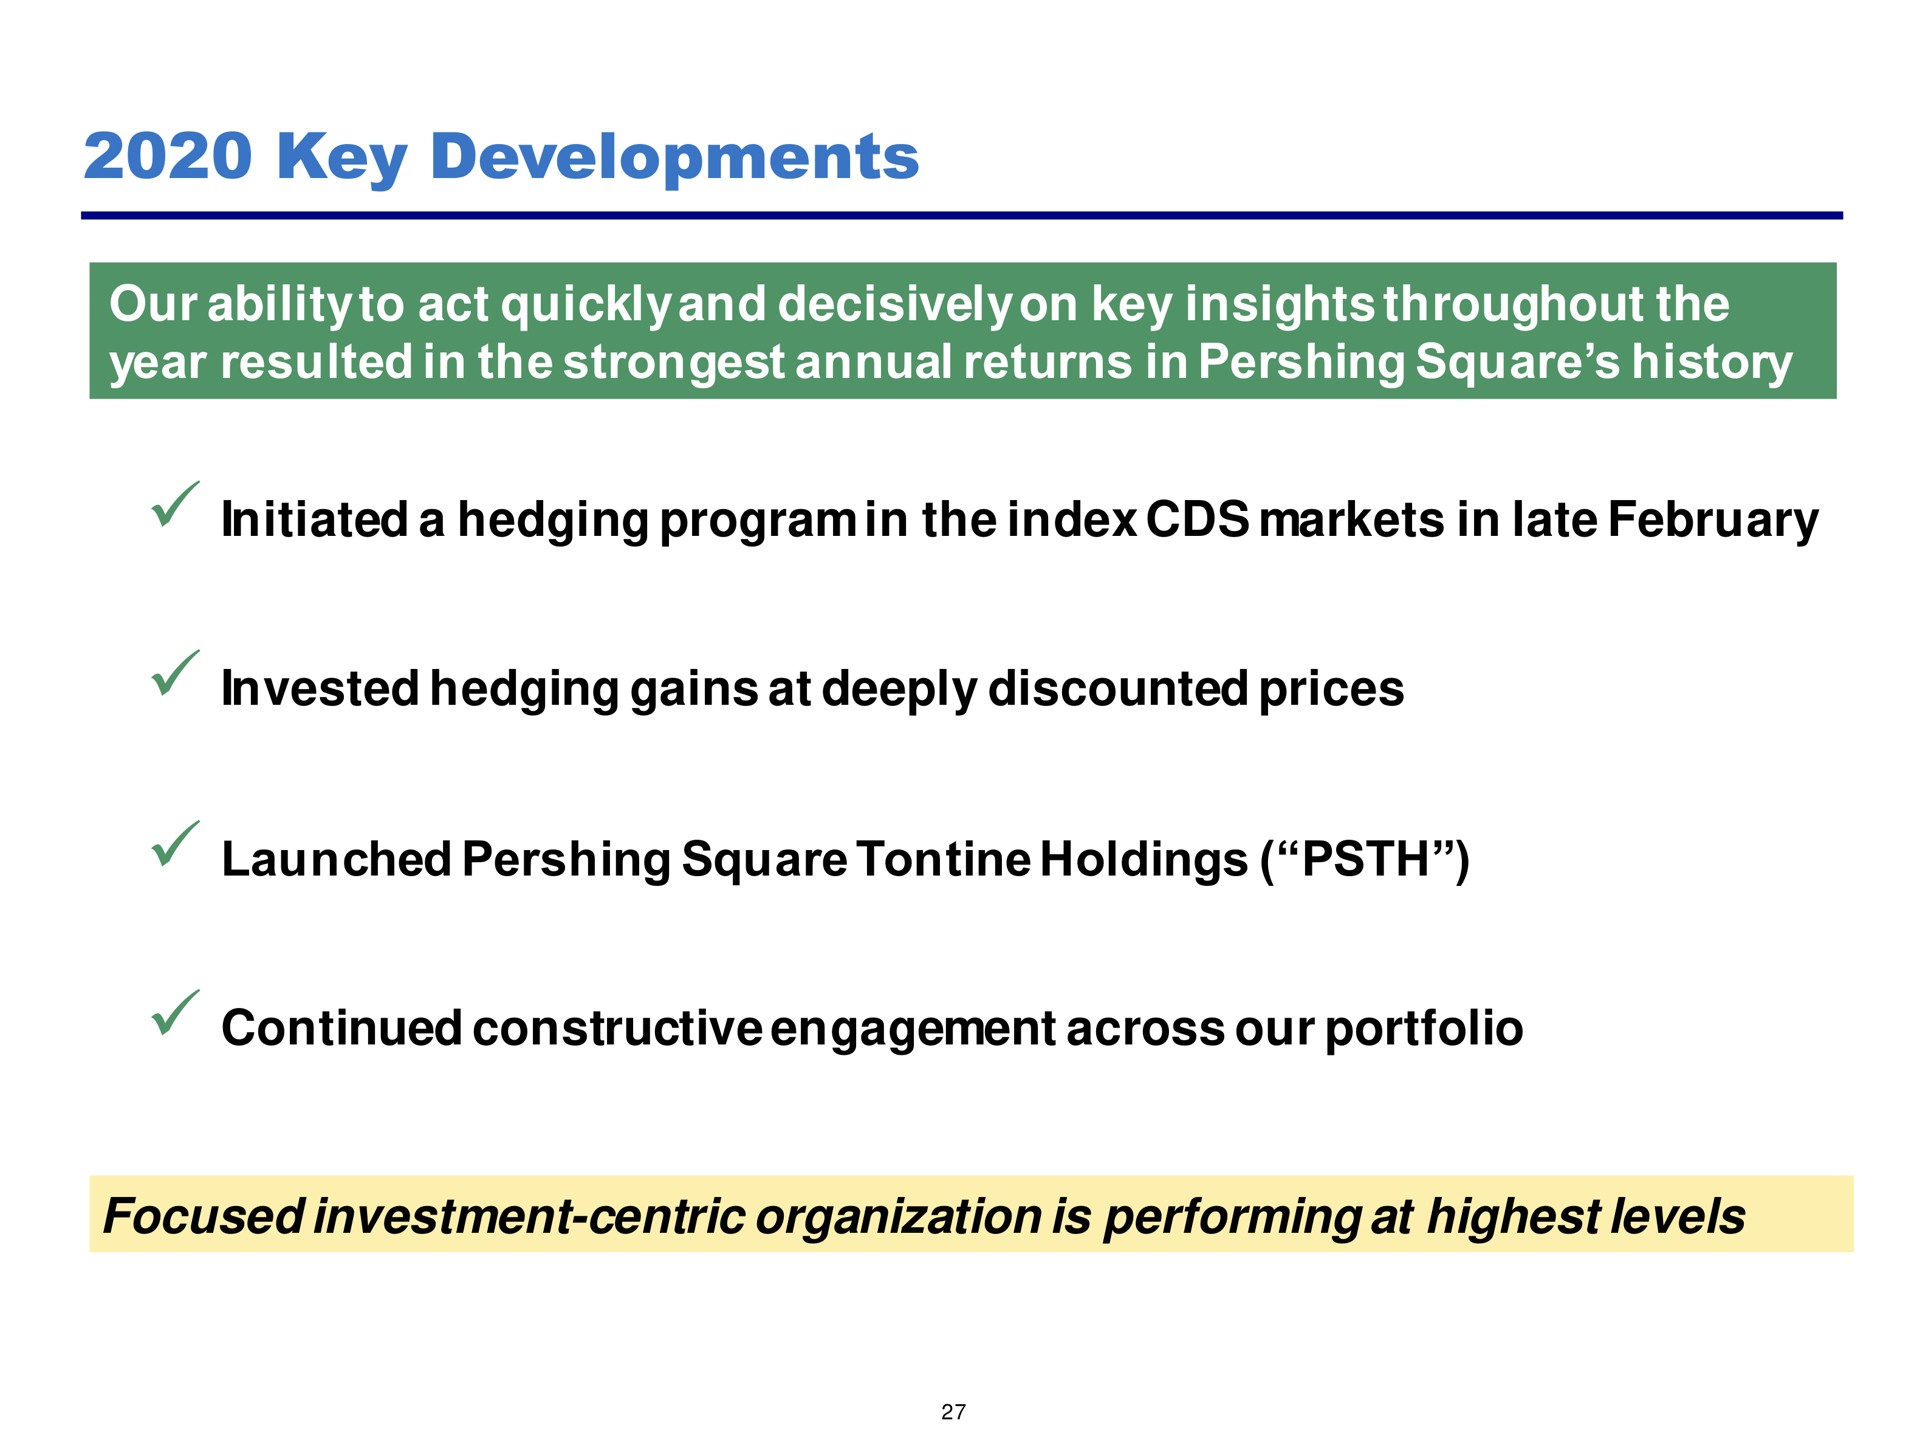 key developments our act quickly and decisively on insights throughout the hedging the index markets in late invested hedging gains at deeply discounted prices continued constructive engagement across our portfolio focused investment centric organization is performing at highest levels | Pershing Square